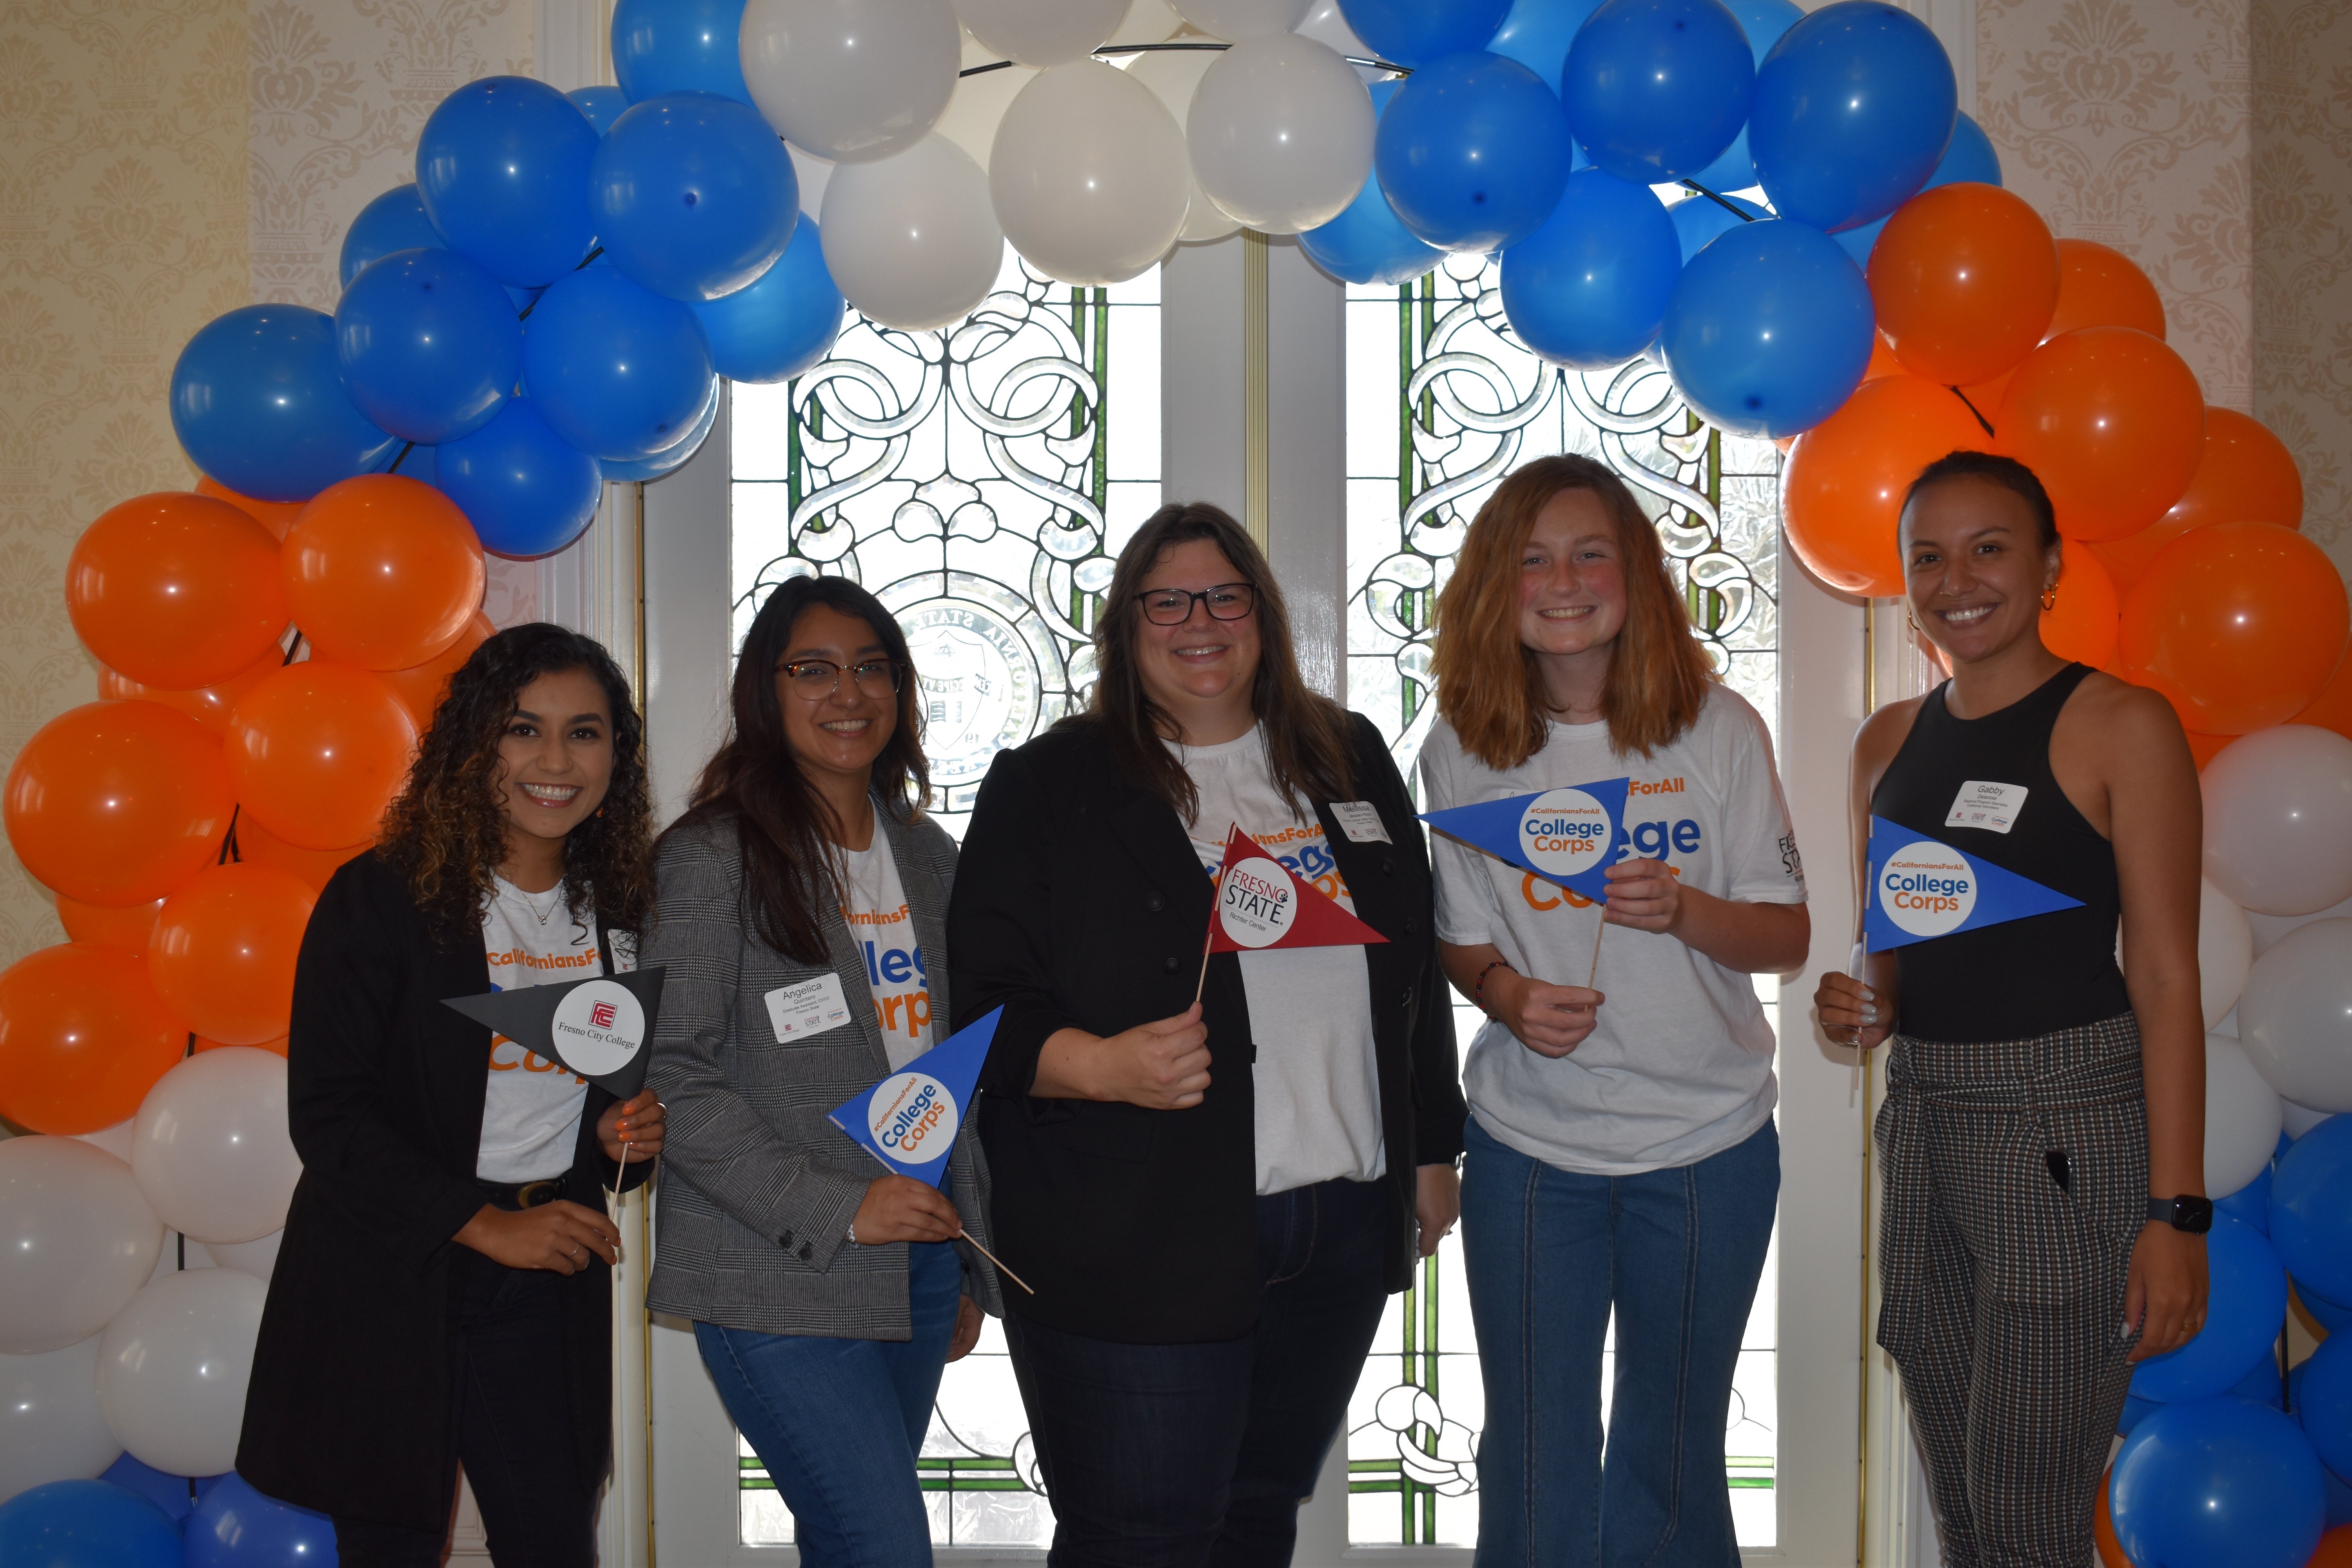 5 individuals stand abreast, smiling under a baloon arch. They are waving pennants that read College Corps, Fresno City College, or Fresno State.